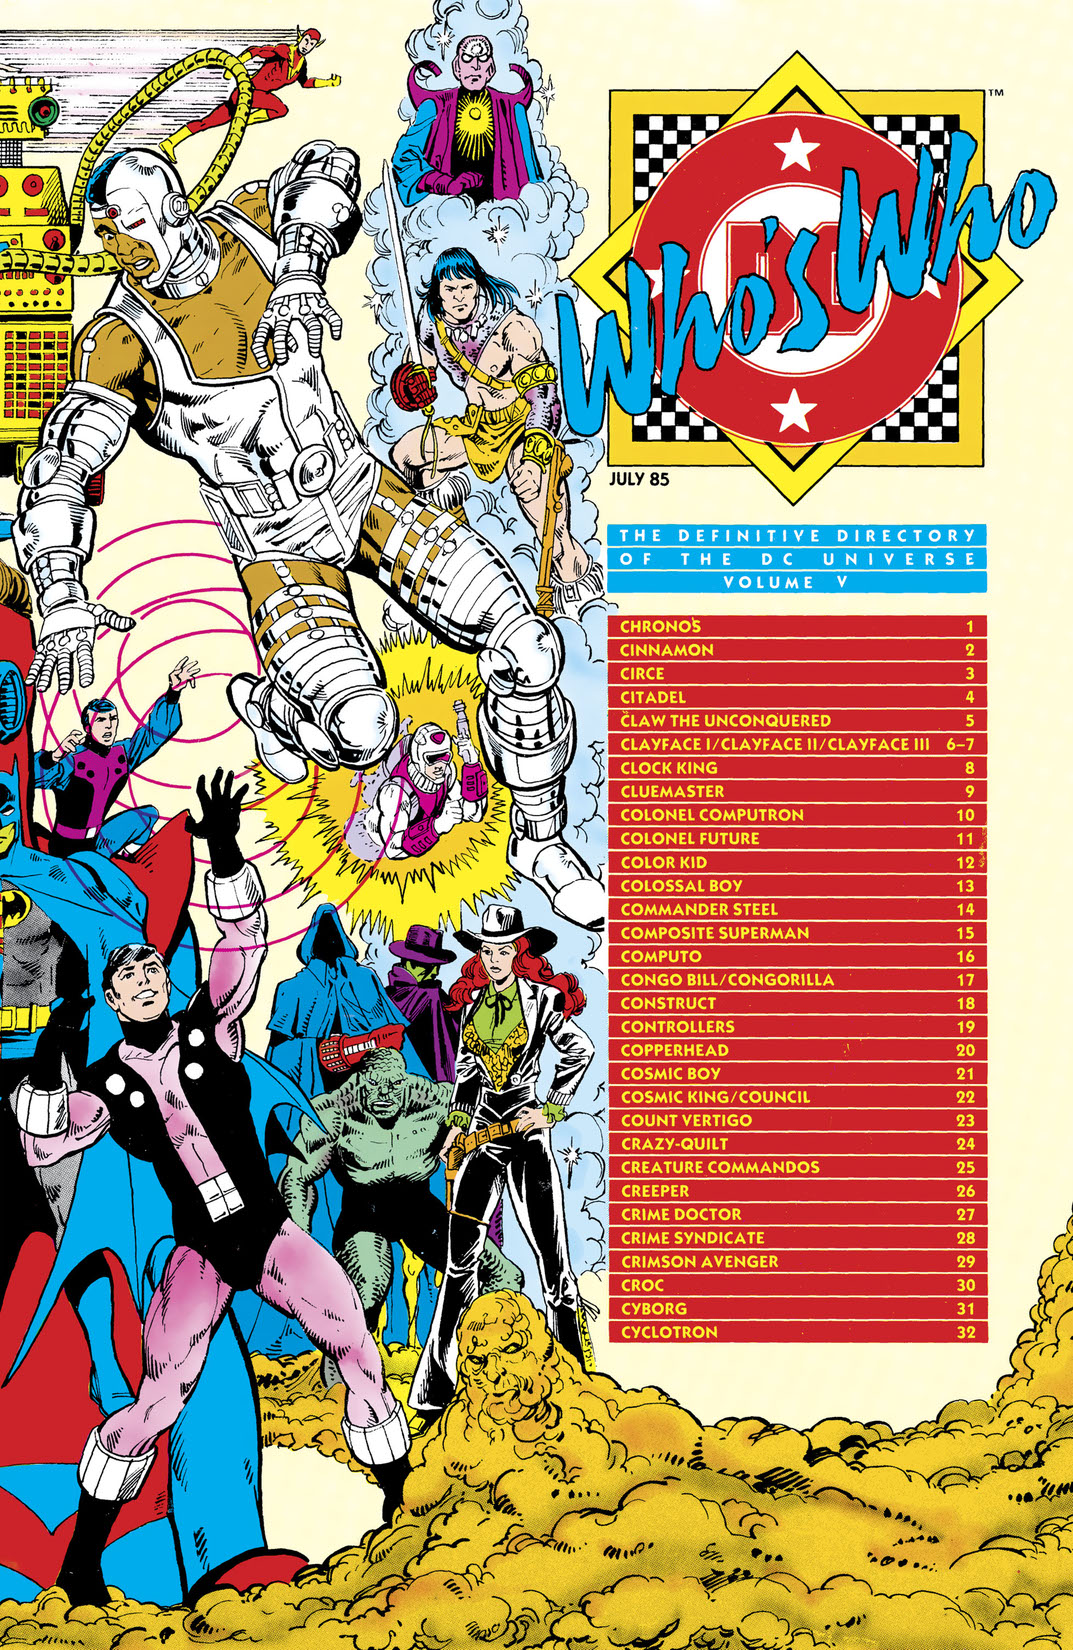 Who's Who: The Definitive Directory of the DC Universe #5 preview images